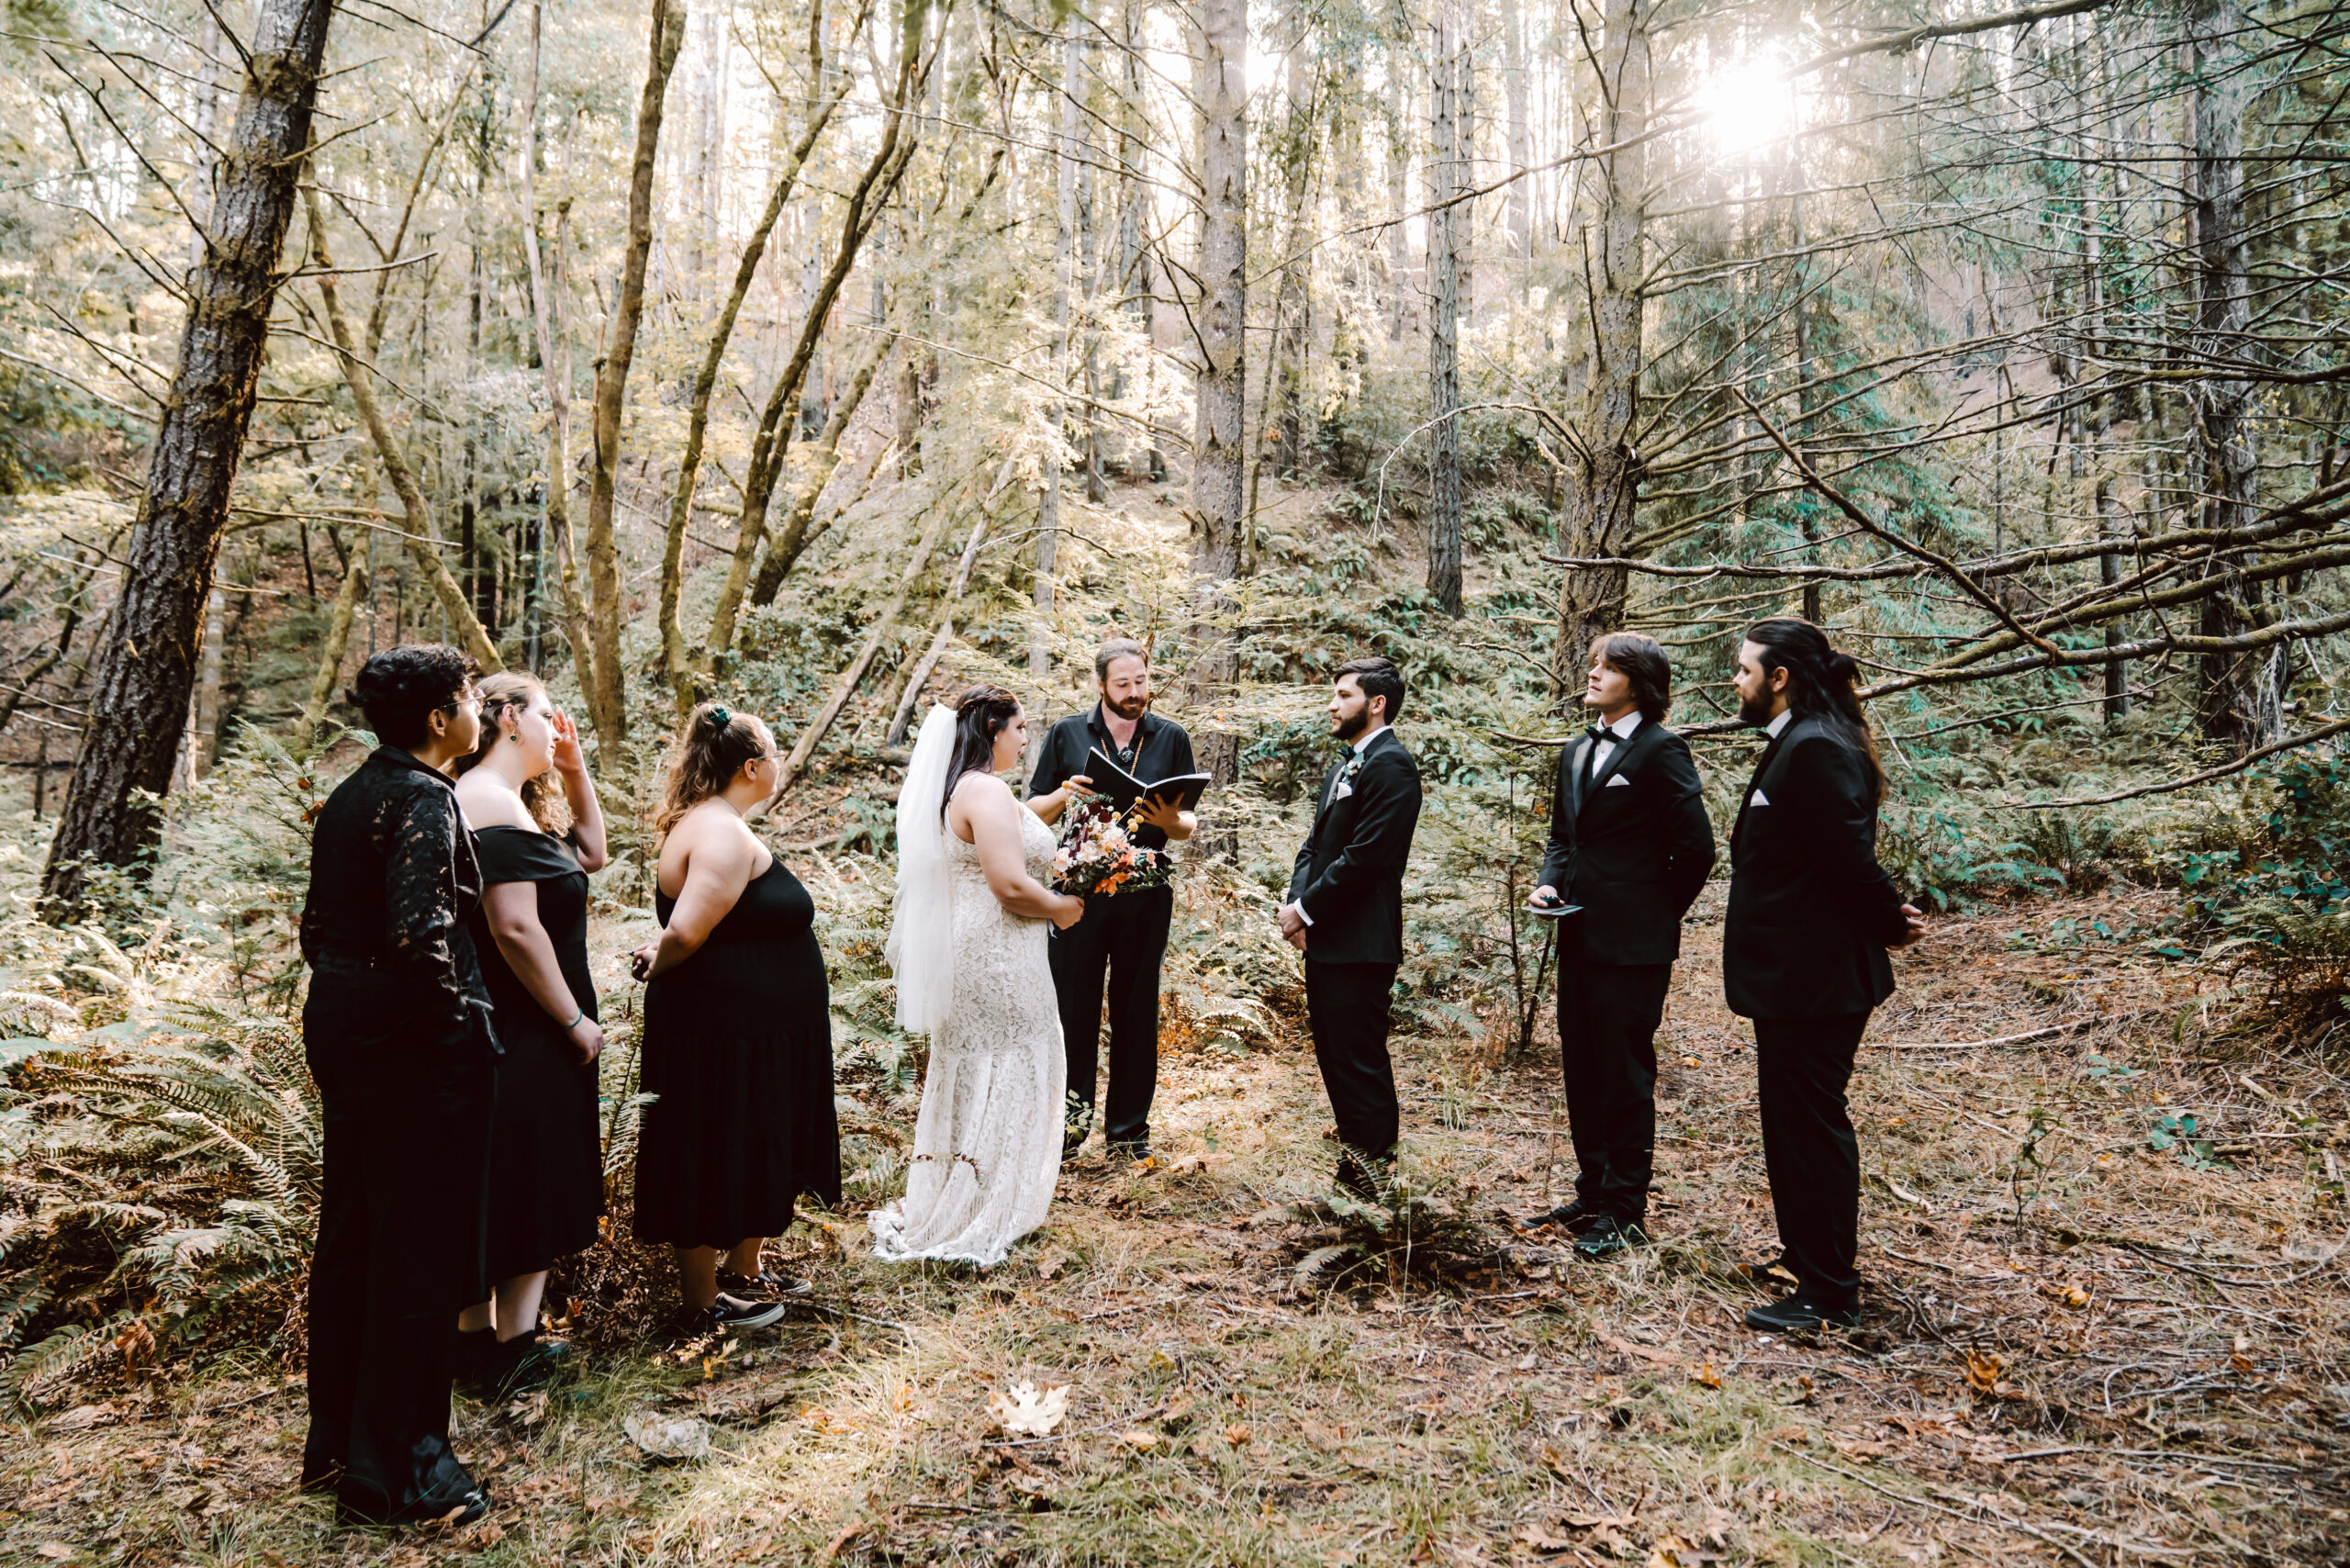 Forest elopement ceremony in Northern California with friends and family